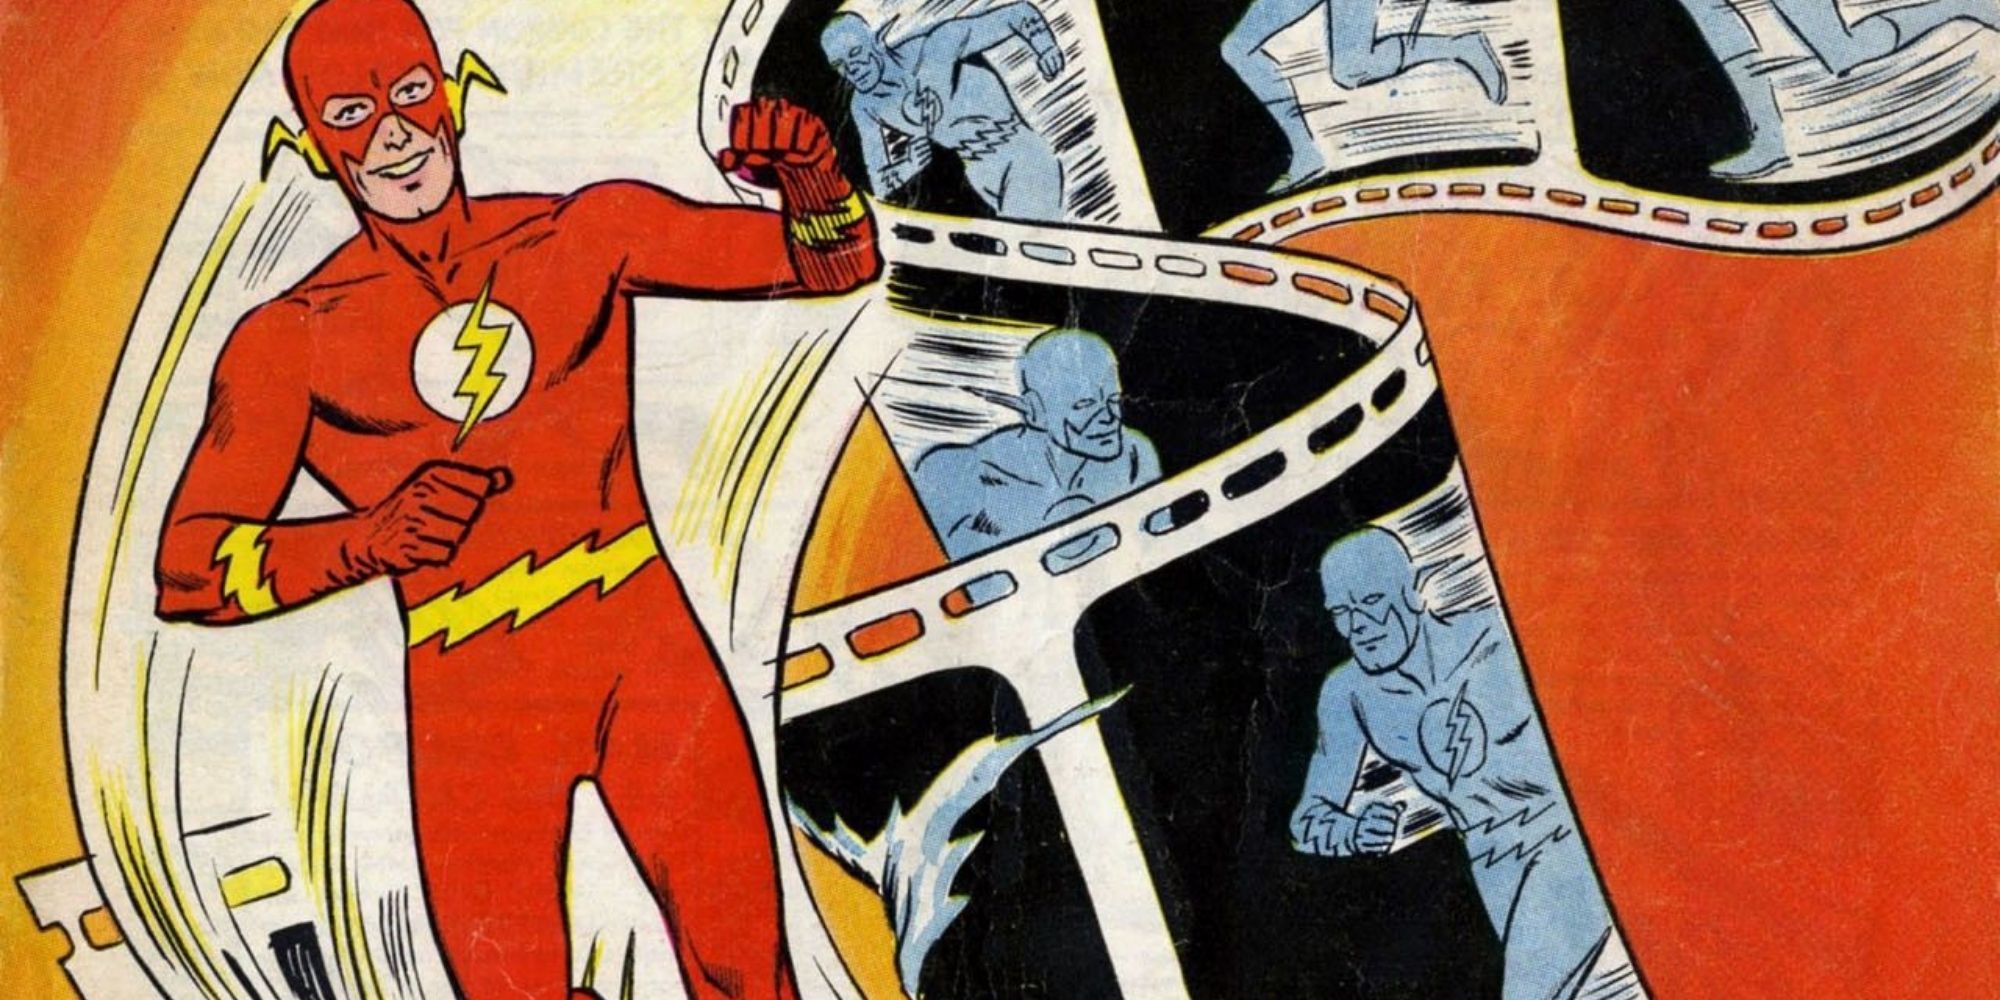 Barry Allen running on the cover of one of his Silver Age comics